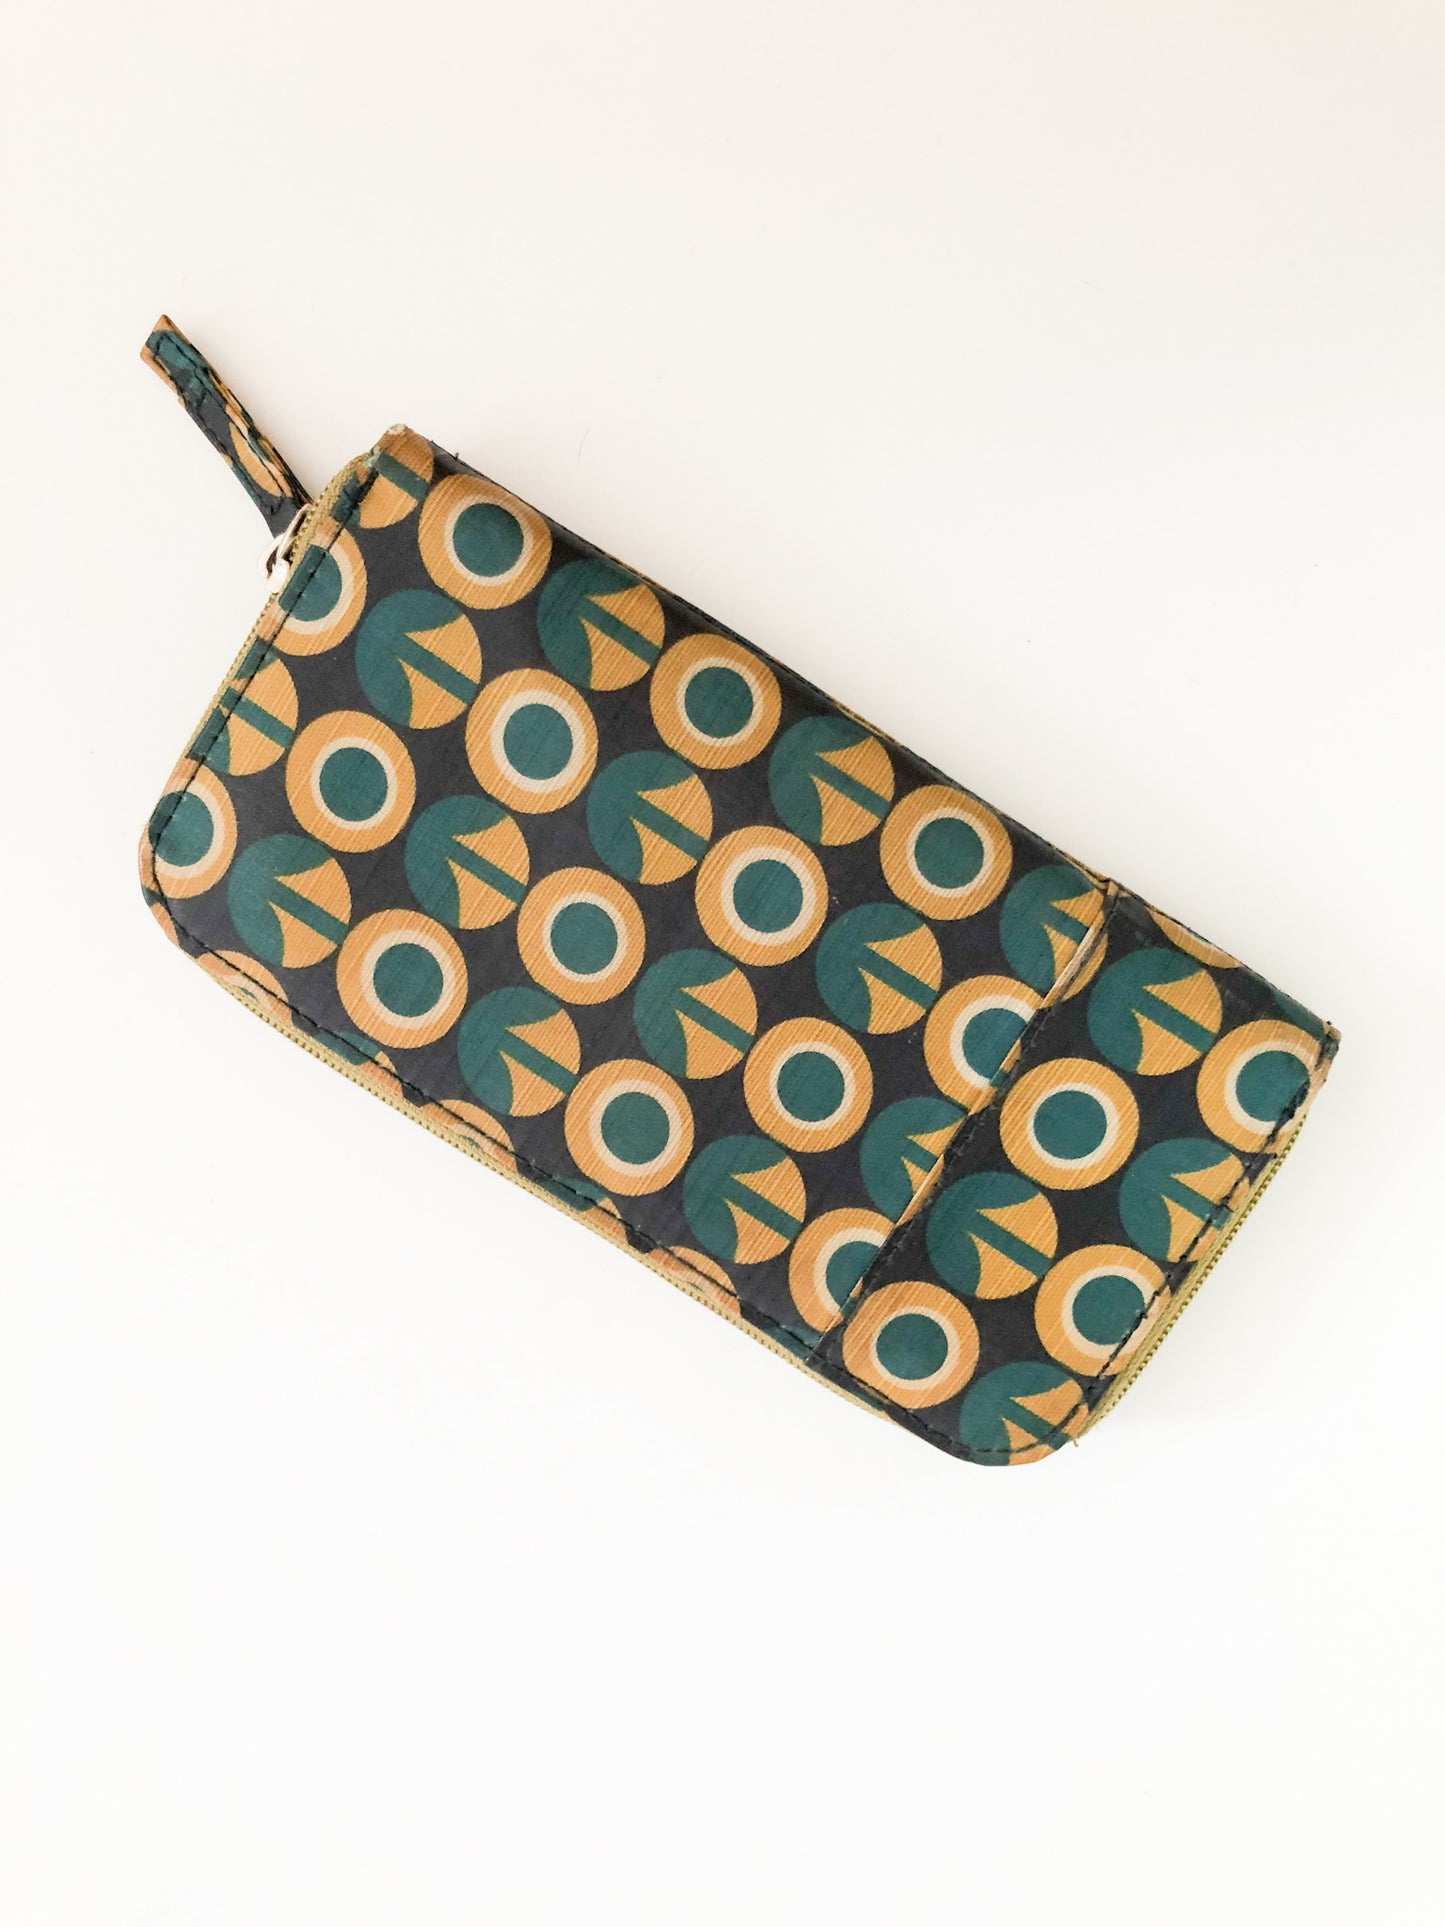 Mono Amsterdam Teal and Mustard Graphic Wallet